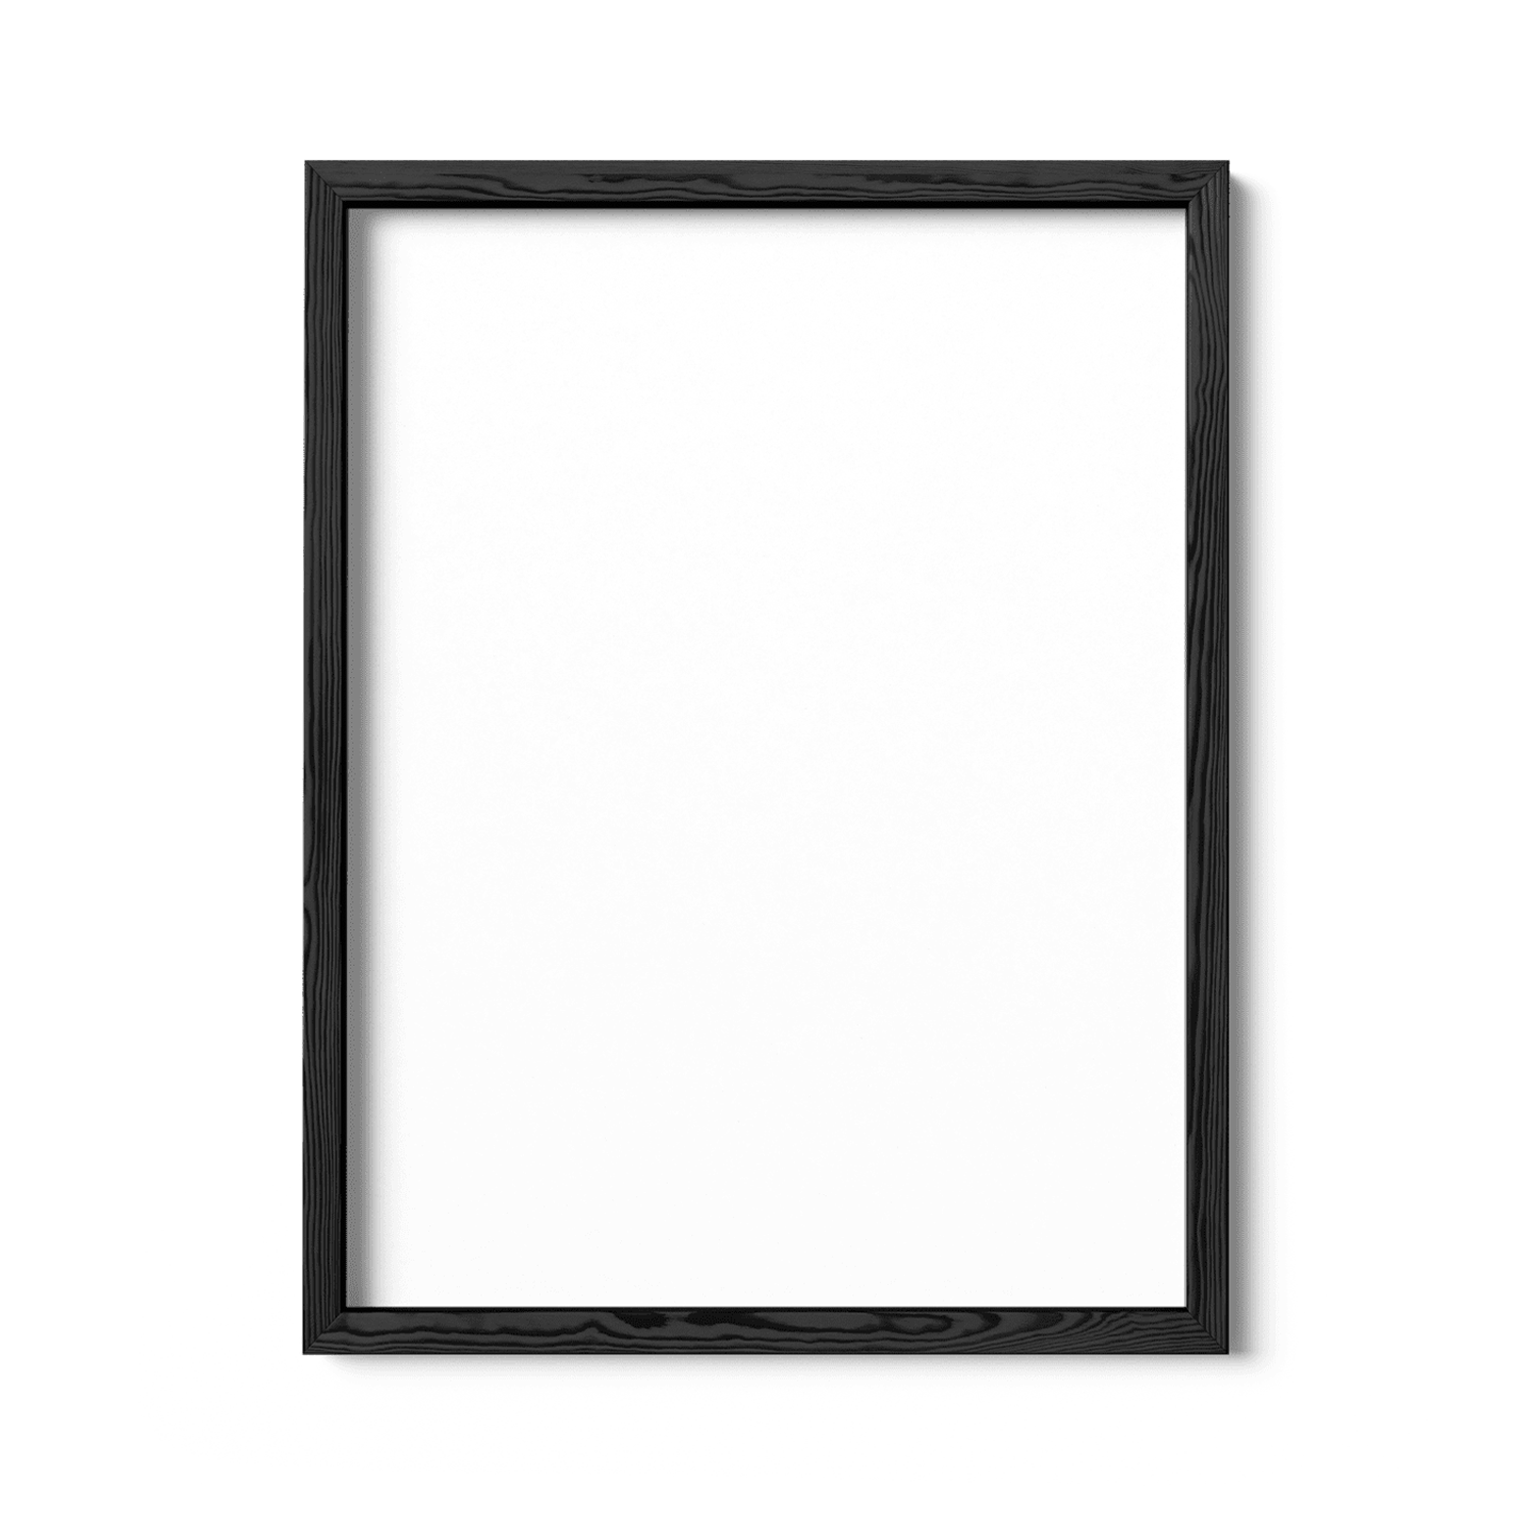 Professional Hockey Arenas Scratch-Off Chart Frame